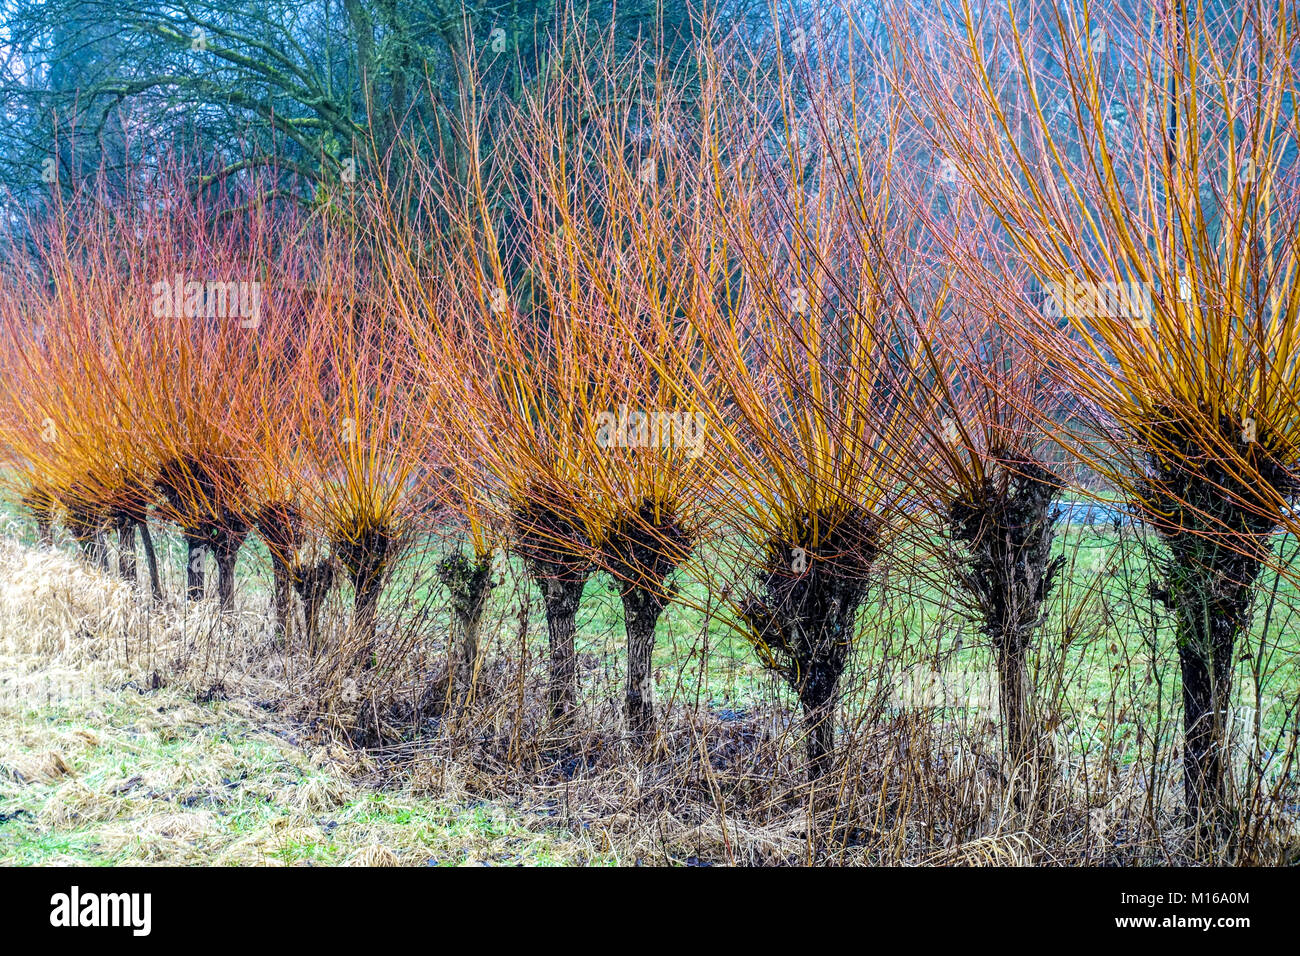 Osier Salix viminalis Pollard Willows used for Basketry Salix Willow Wicker Willow Trees Common Osier Willow Row Meadow Winter Osiers Line Scene Stock Photo